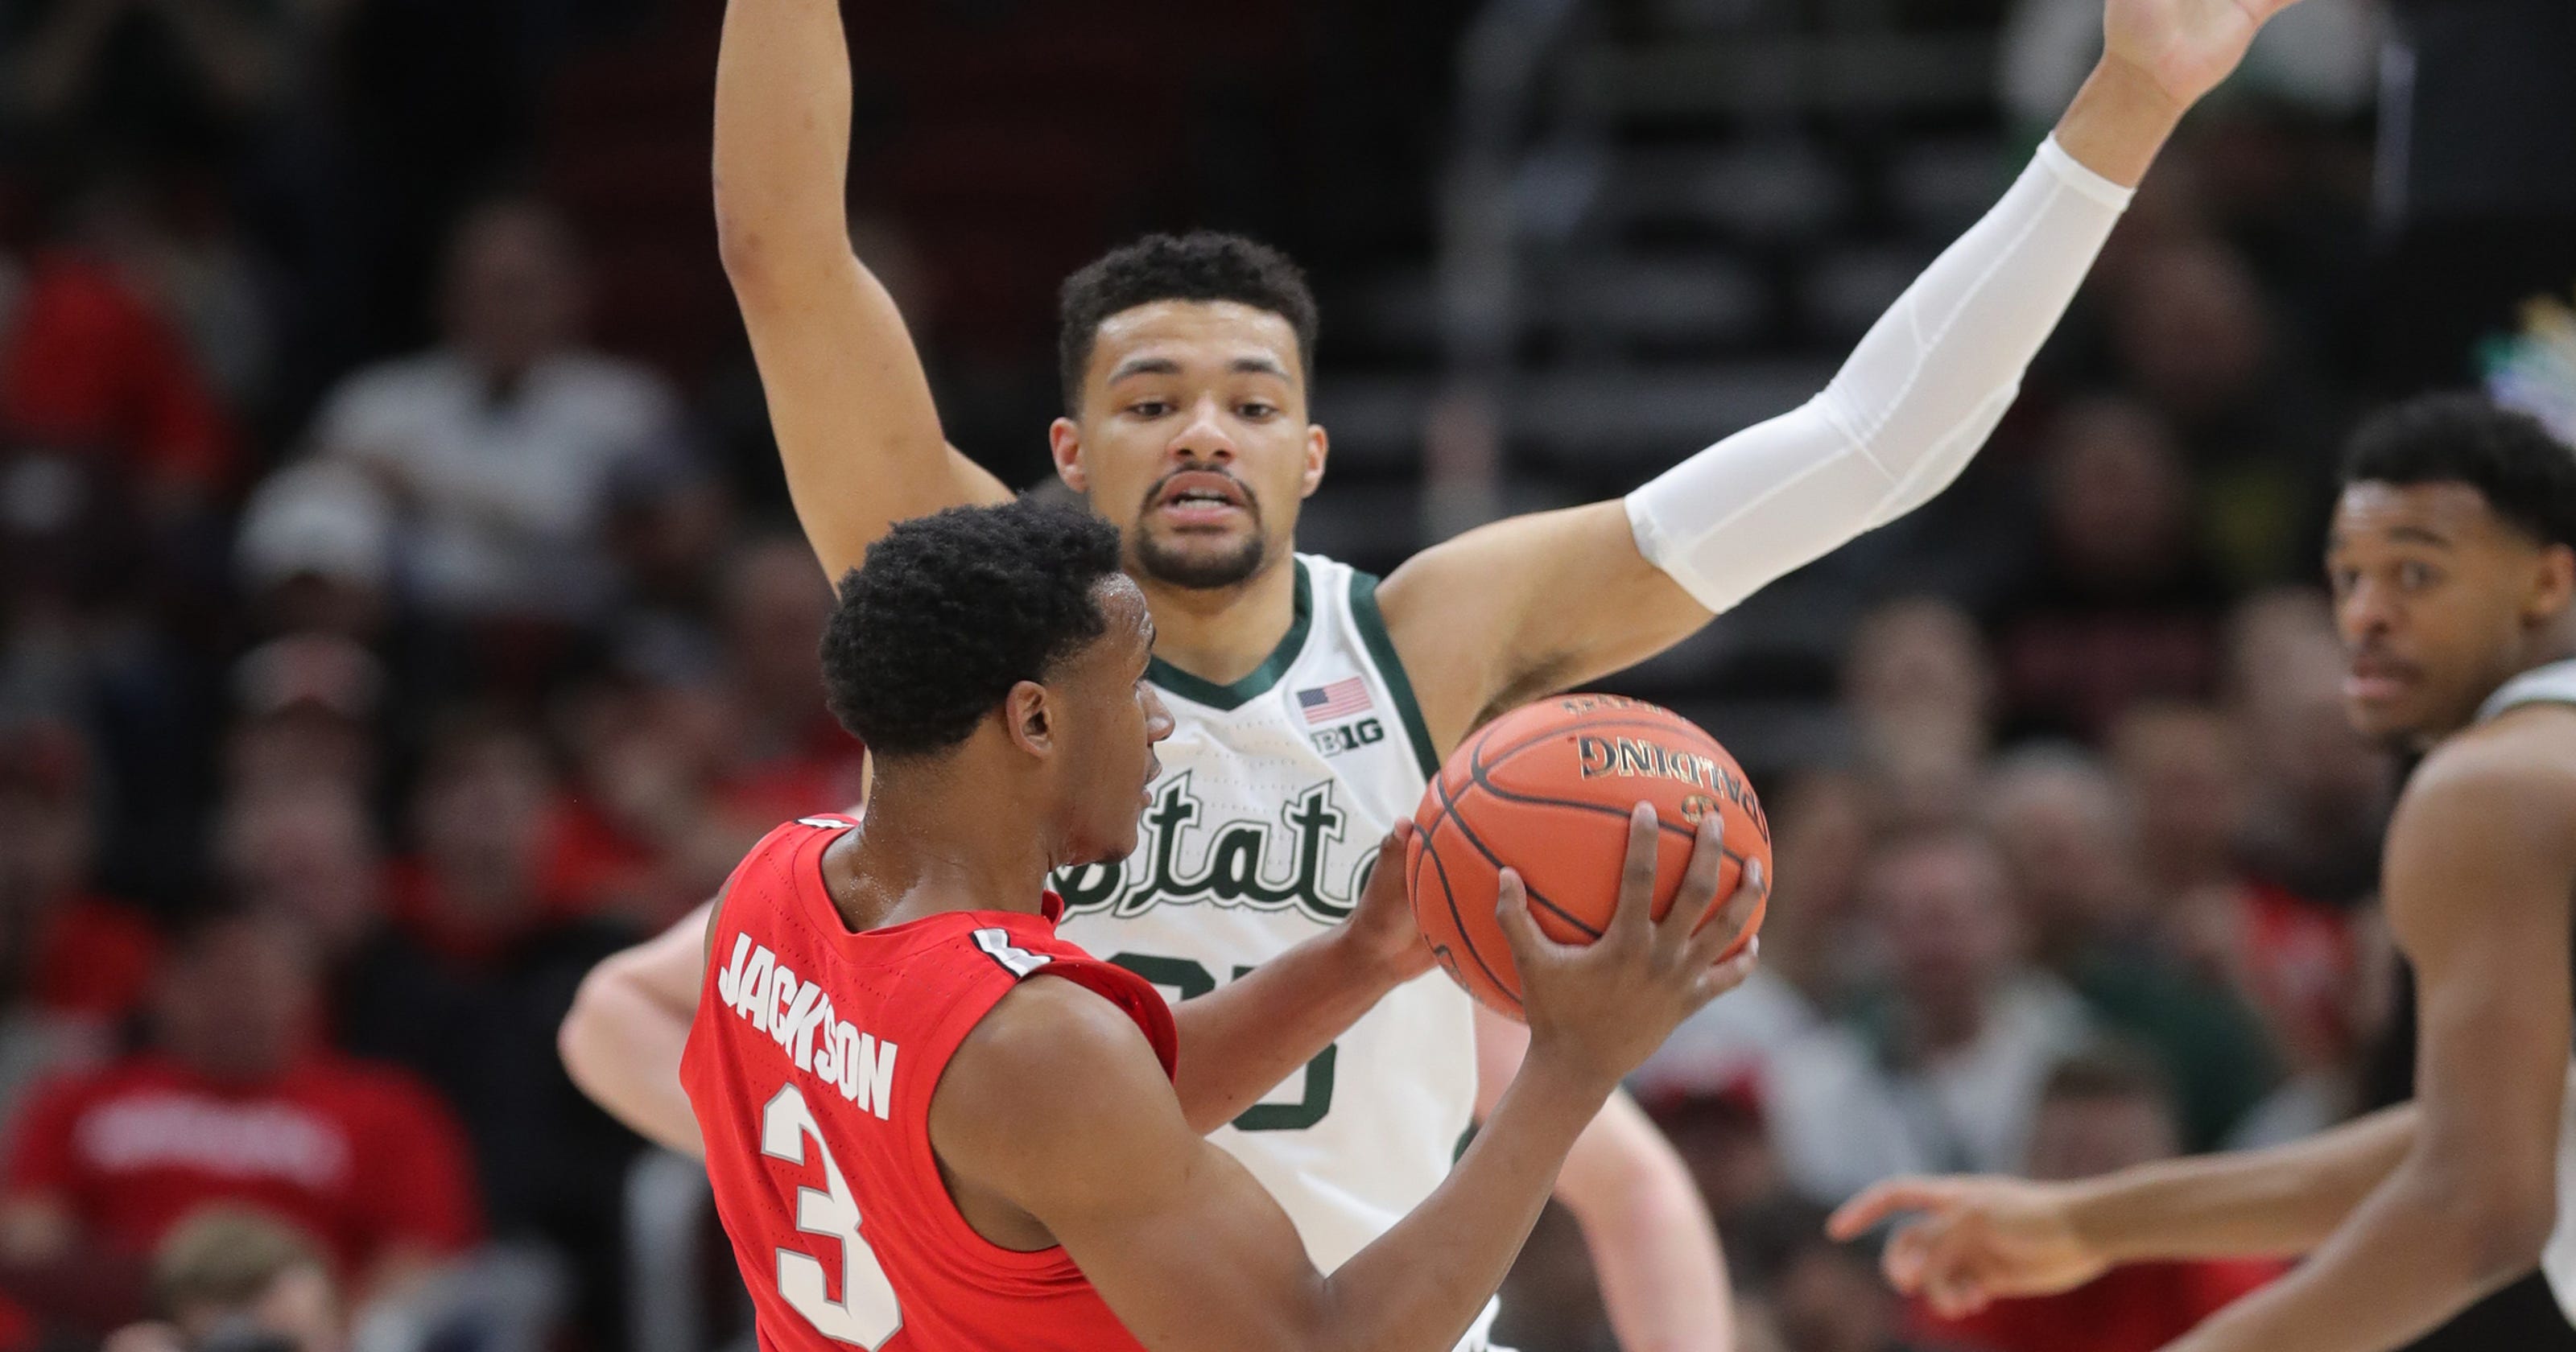 Big Ten basketball tournament schedule, results from Chicago